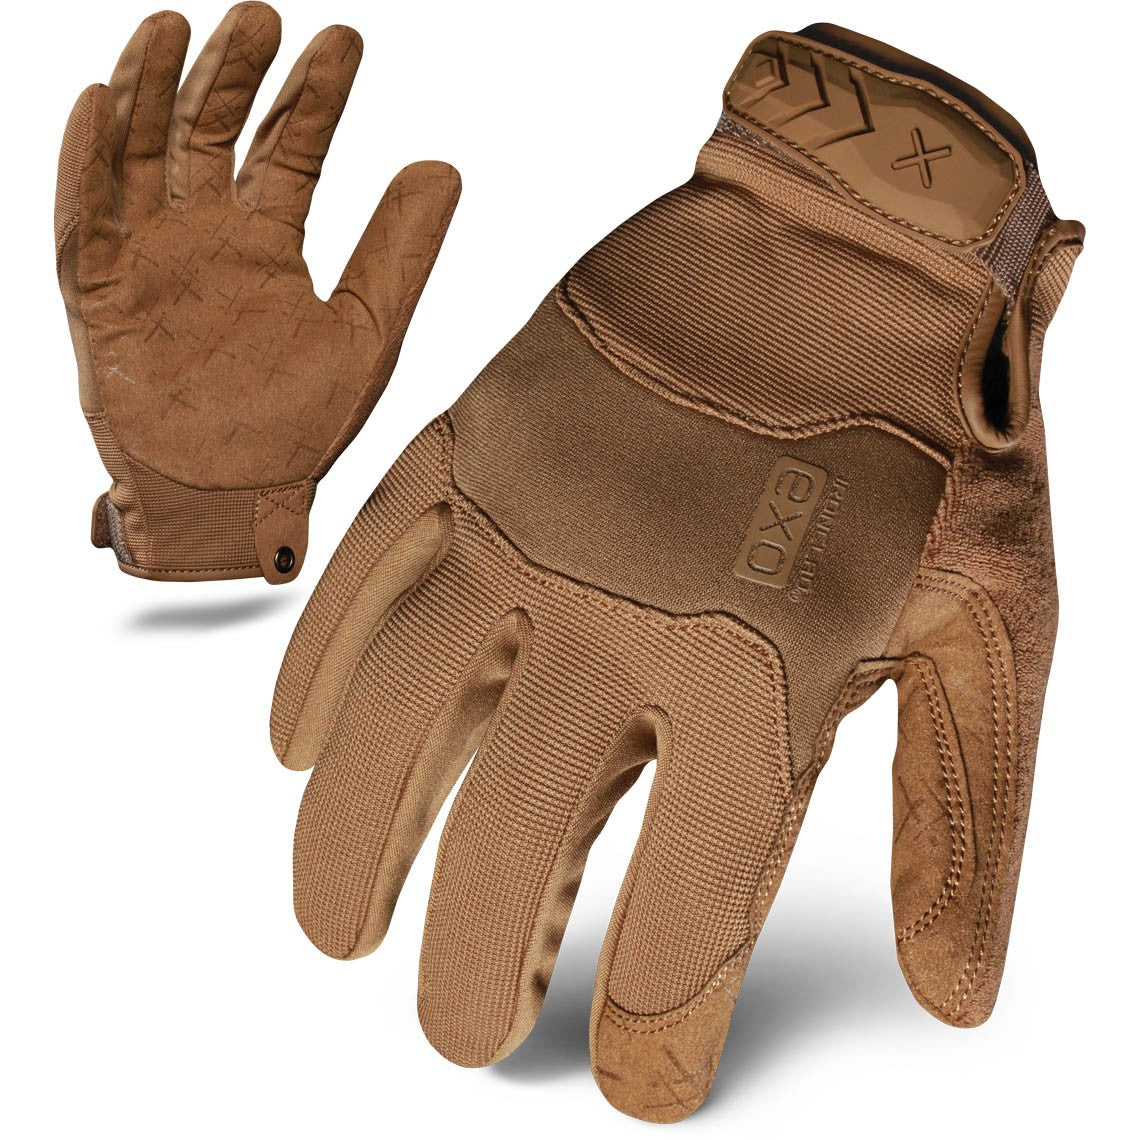 Ironclad EXOT-P Tactical Pro Gloves - Coyote Brown